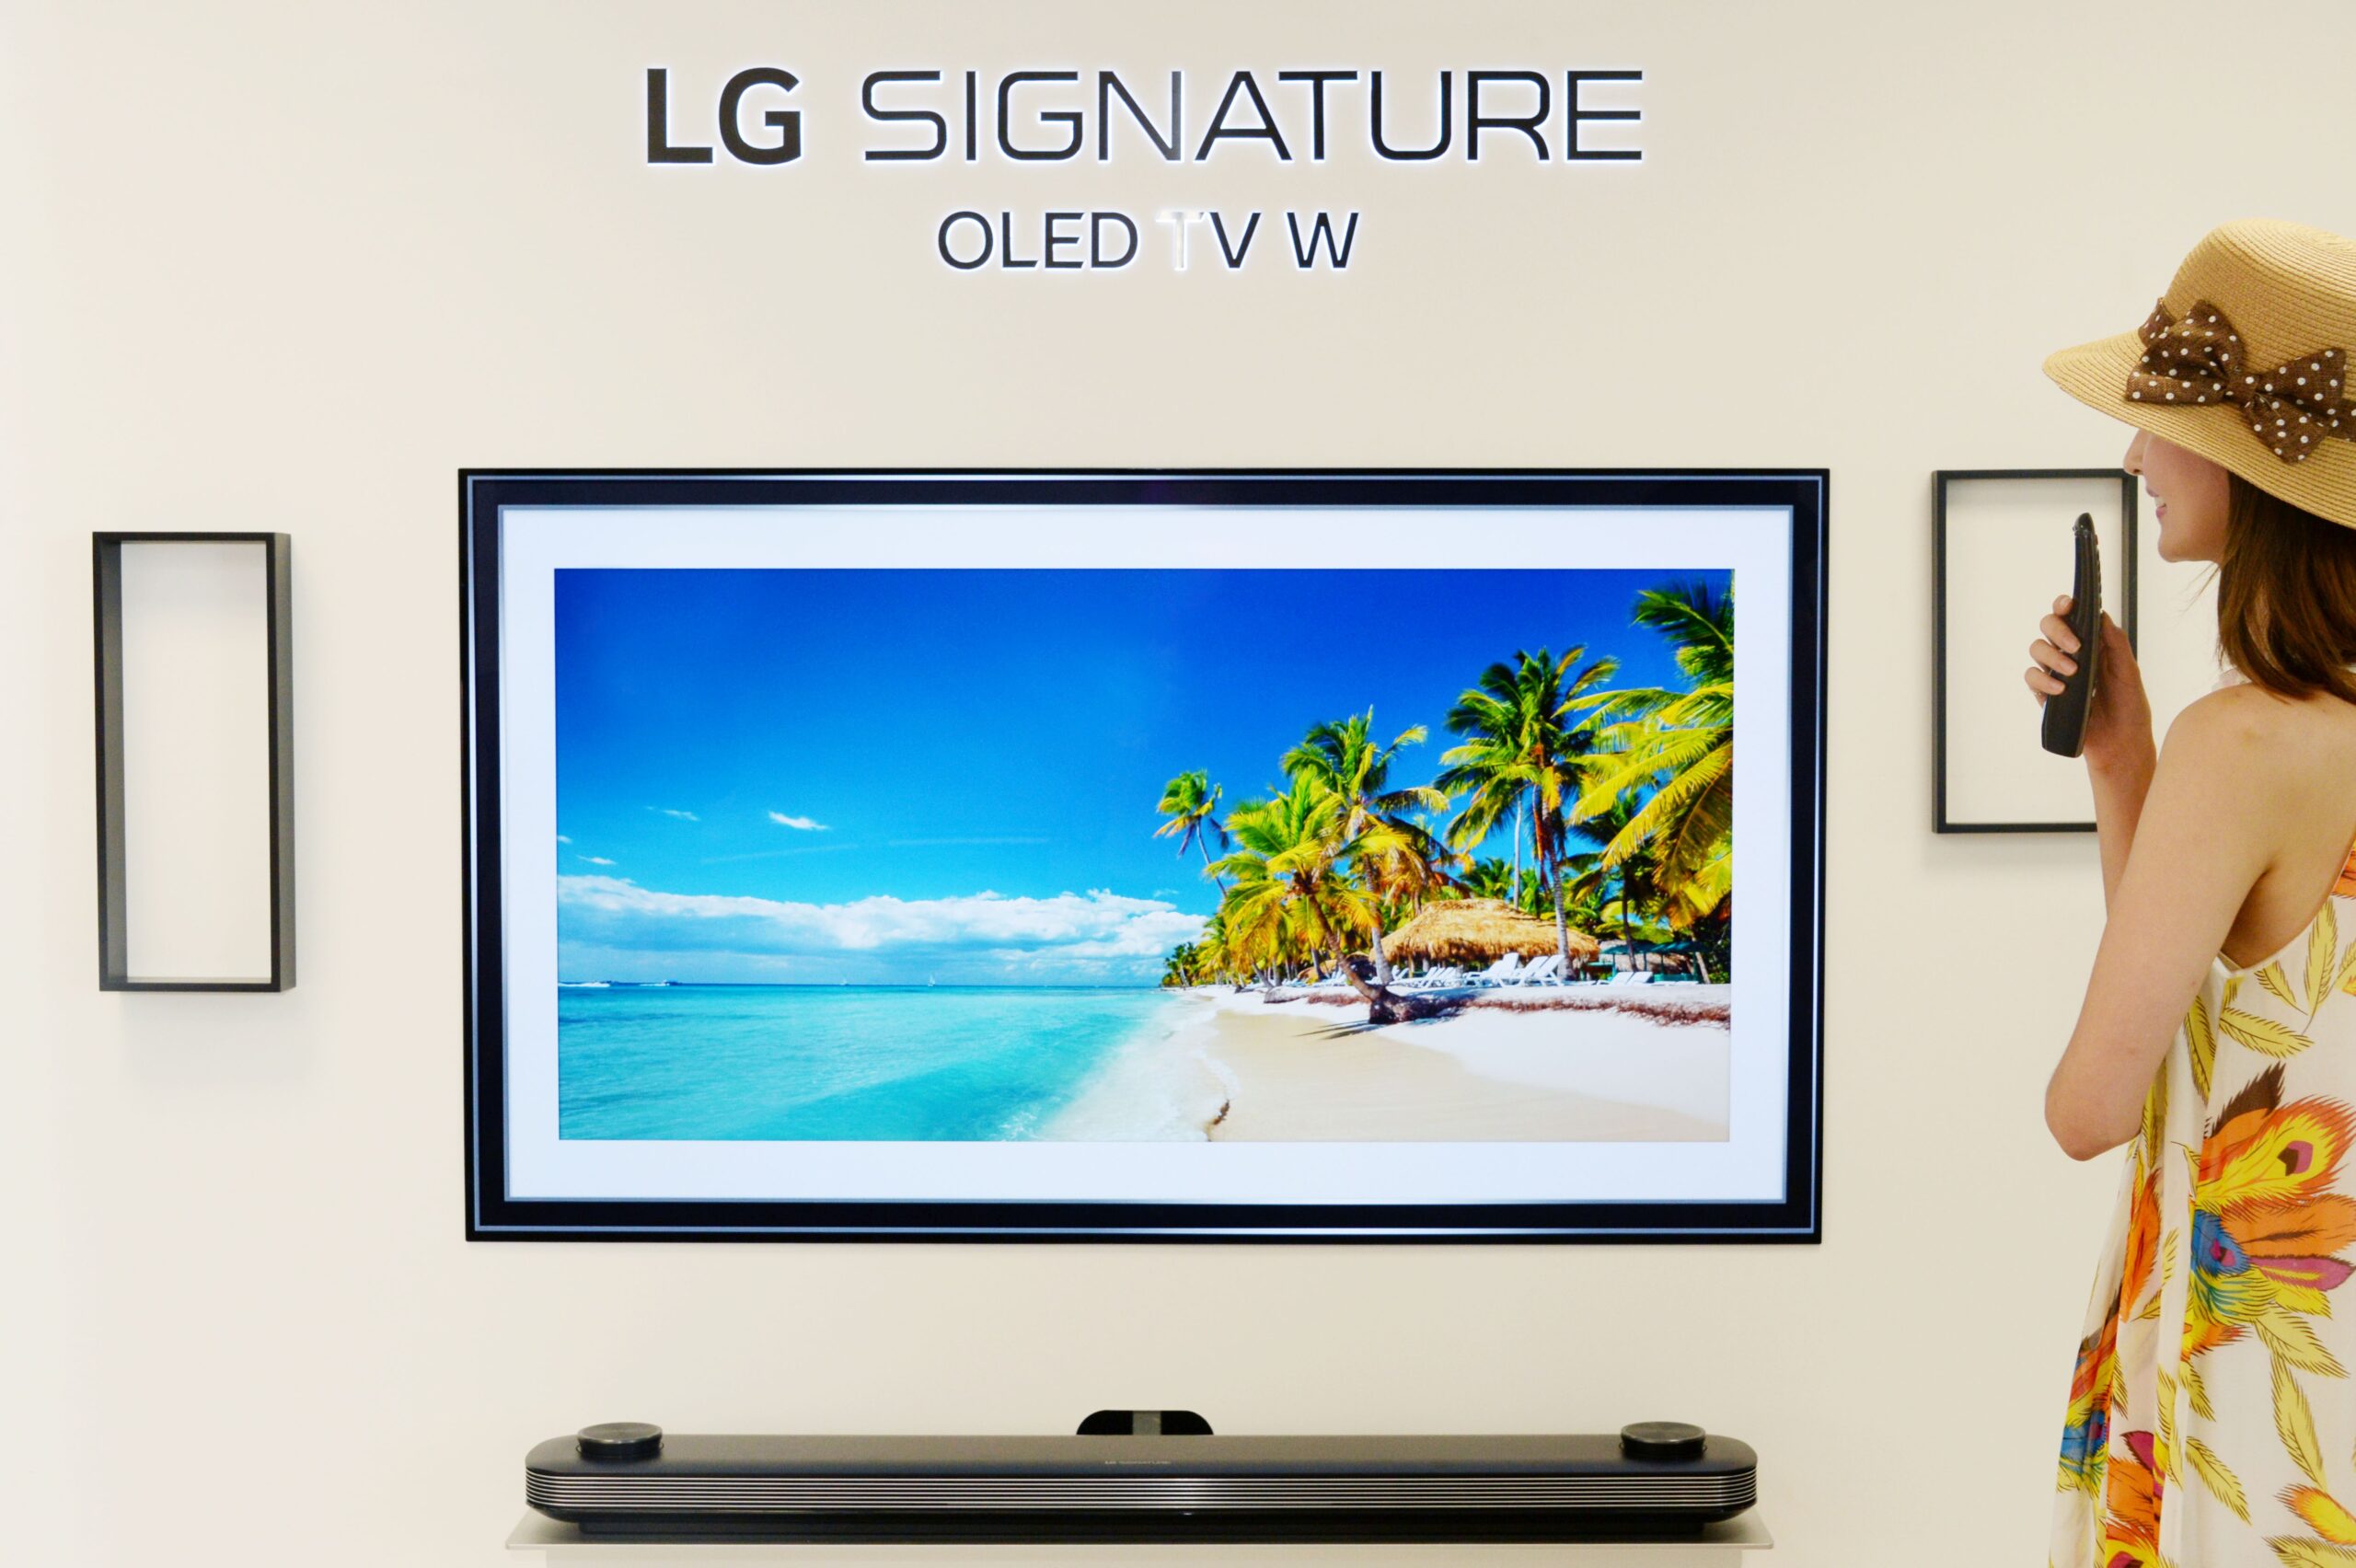 A woman looks at LG SIGNATURE OLED TV W which displays the tropical beach and coconut trees on its screen.